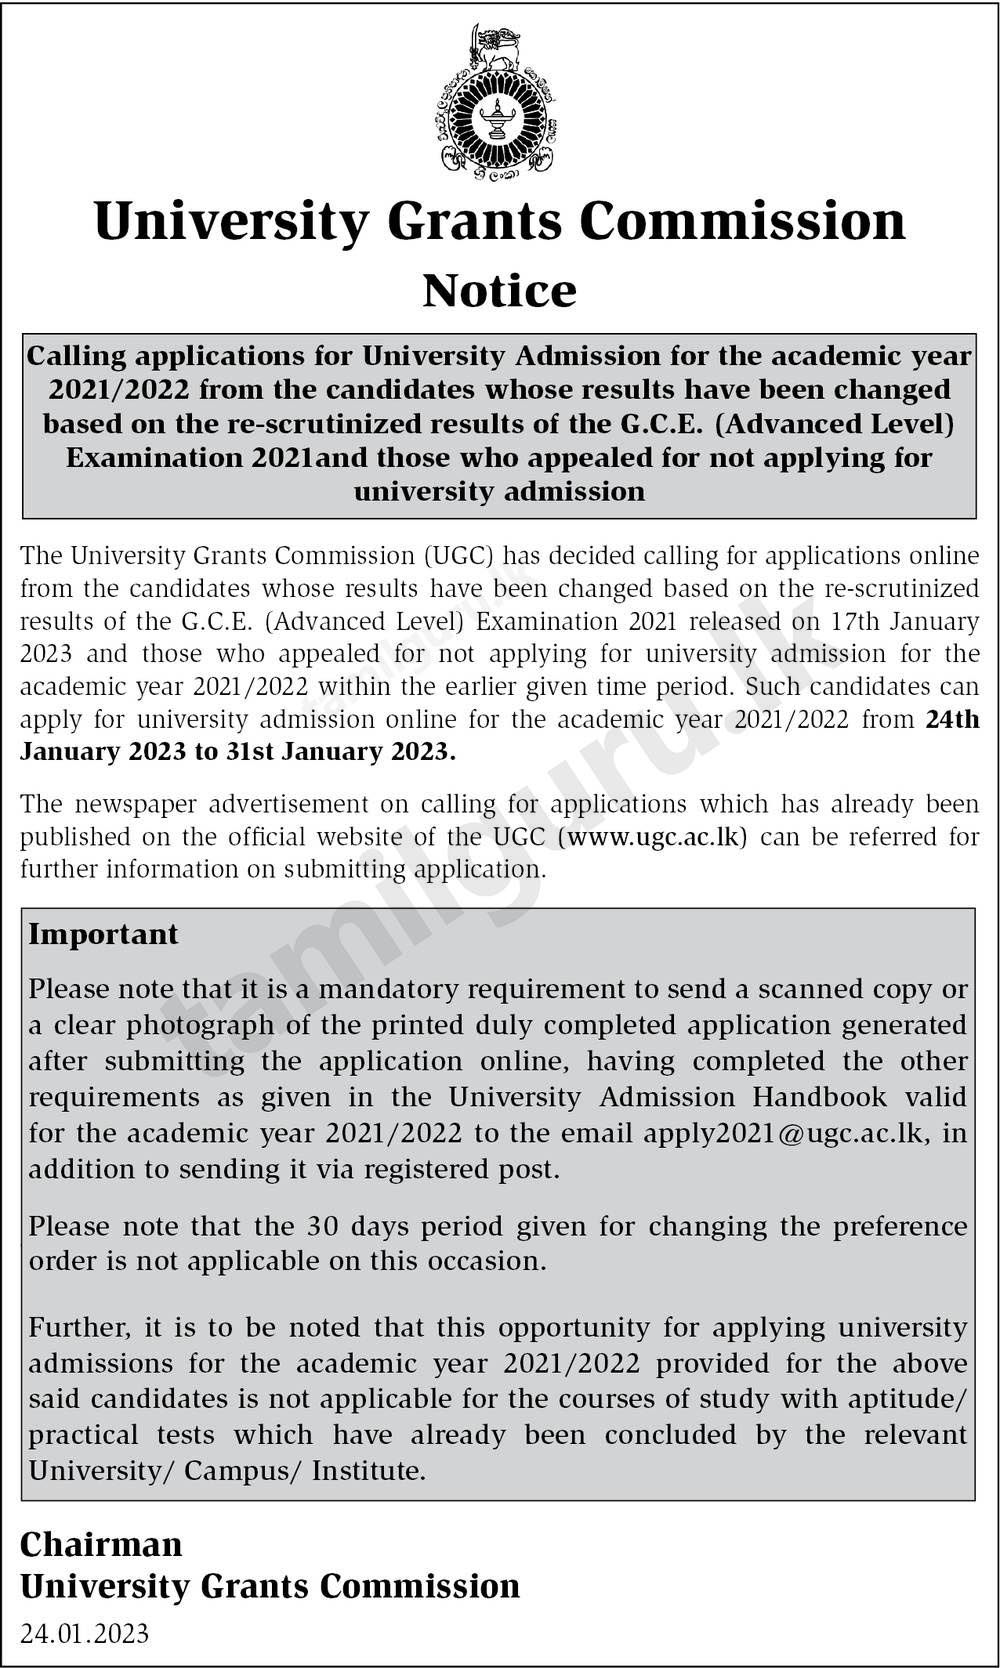 Applications for University Admission (2021/2022) - After Recorrection Results (GCE A/L 2021)